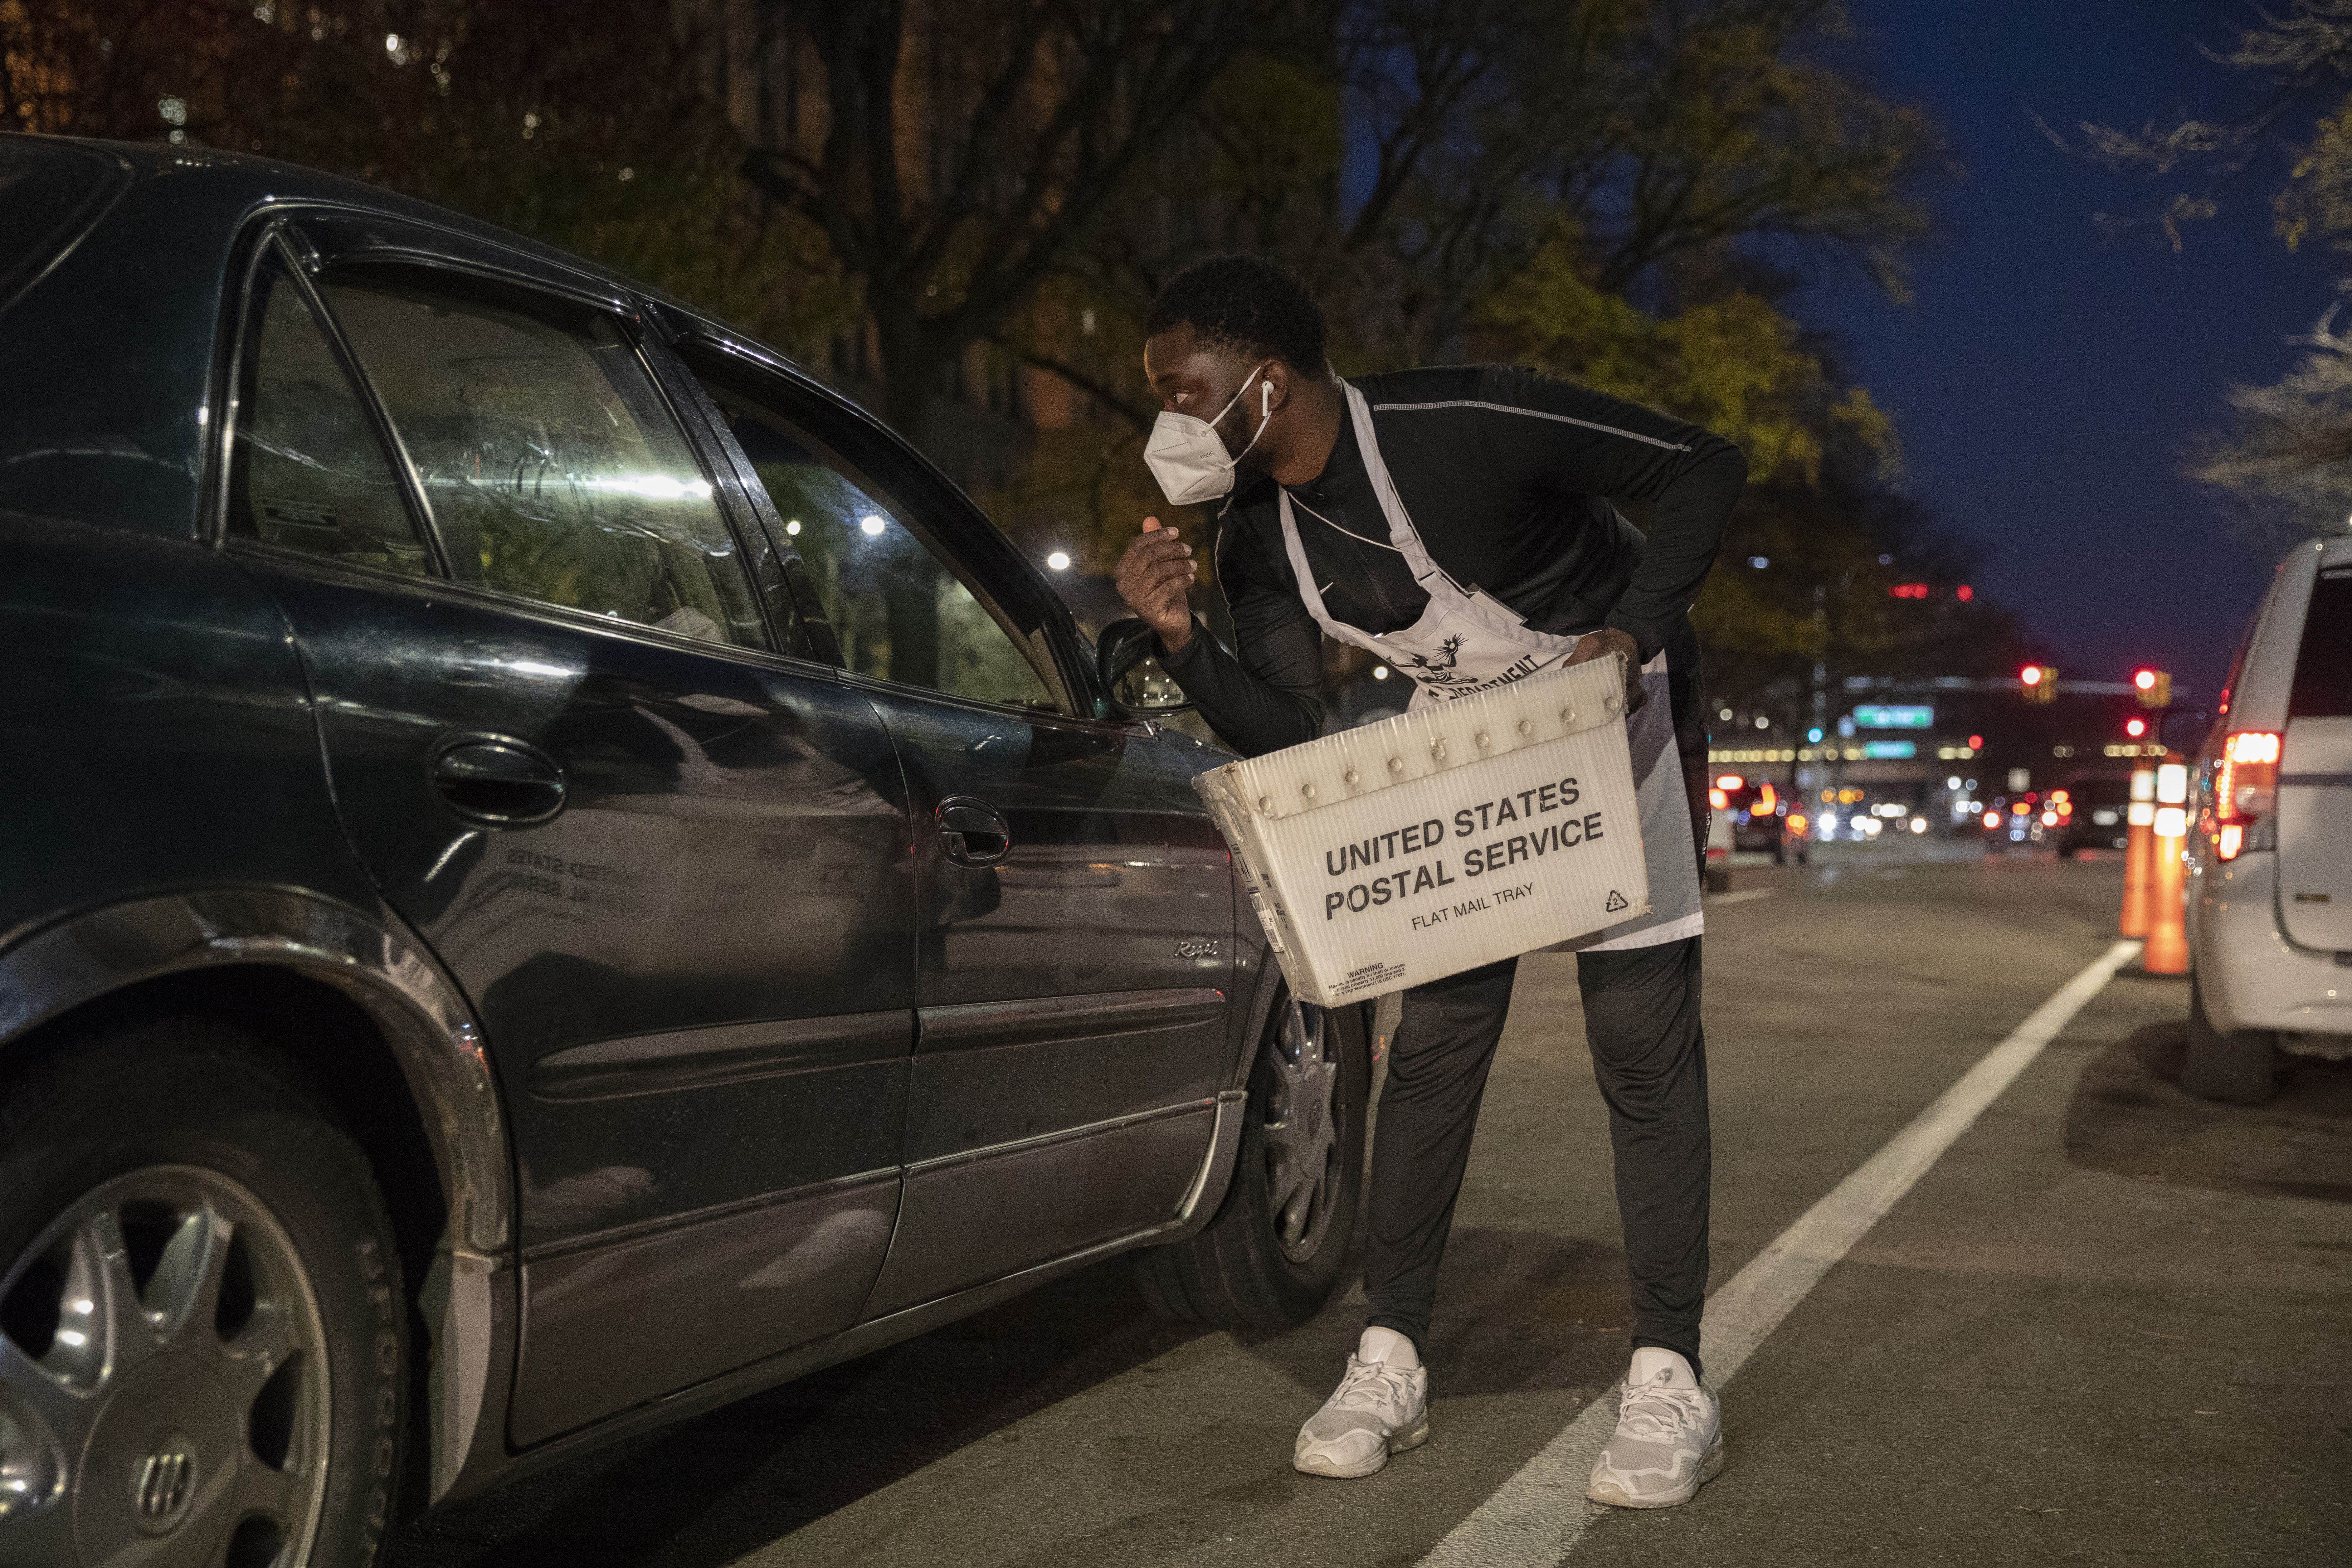 Steven Addo, 23, talks with someone dropping of an absentee ballot outside the Department of Elections on November 3, 2020 in Detroit, Michigan. 